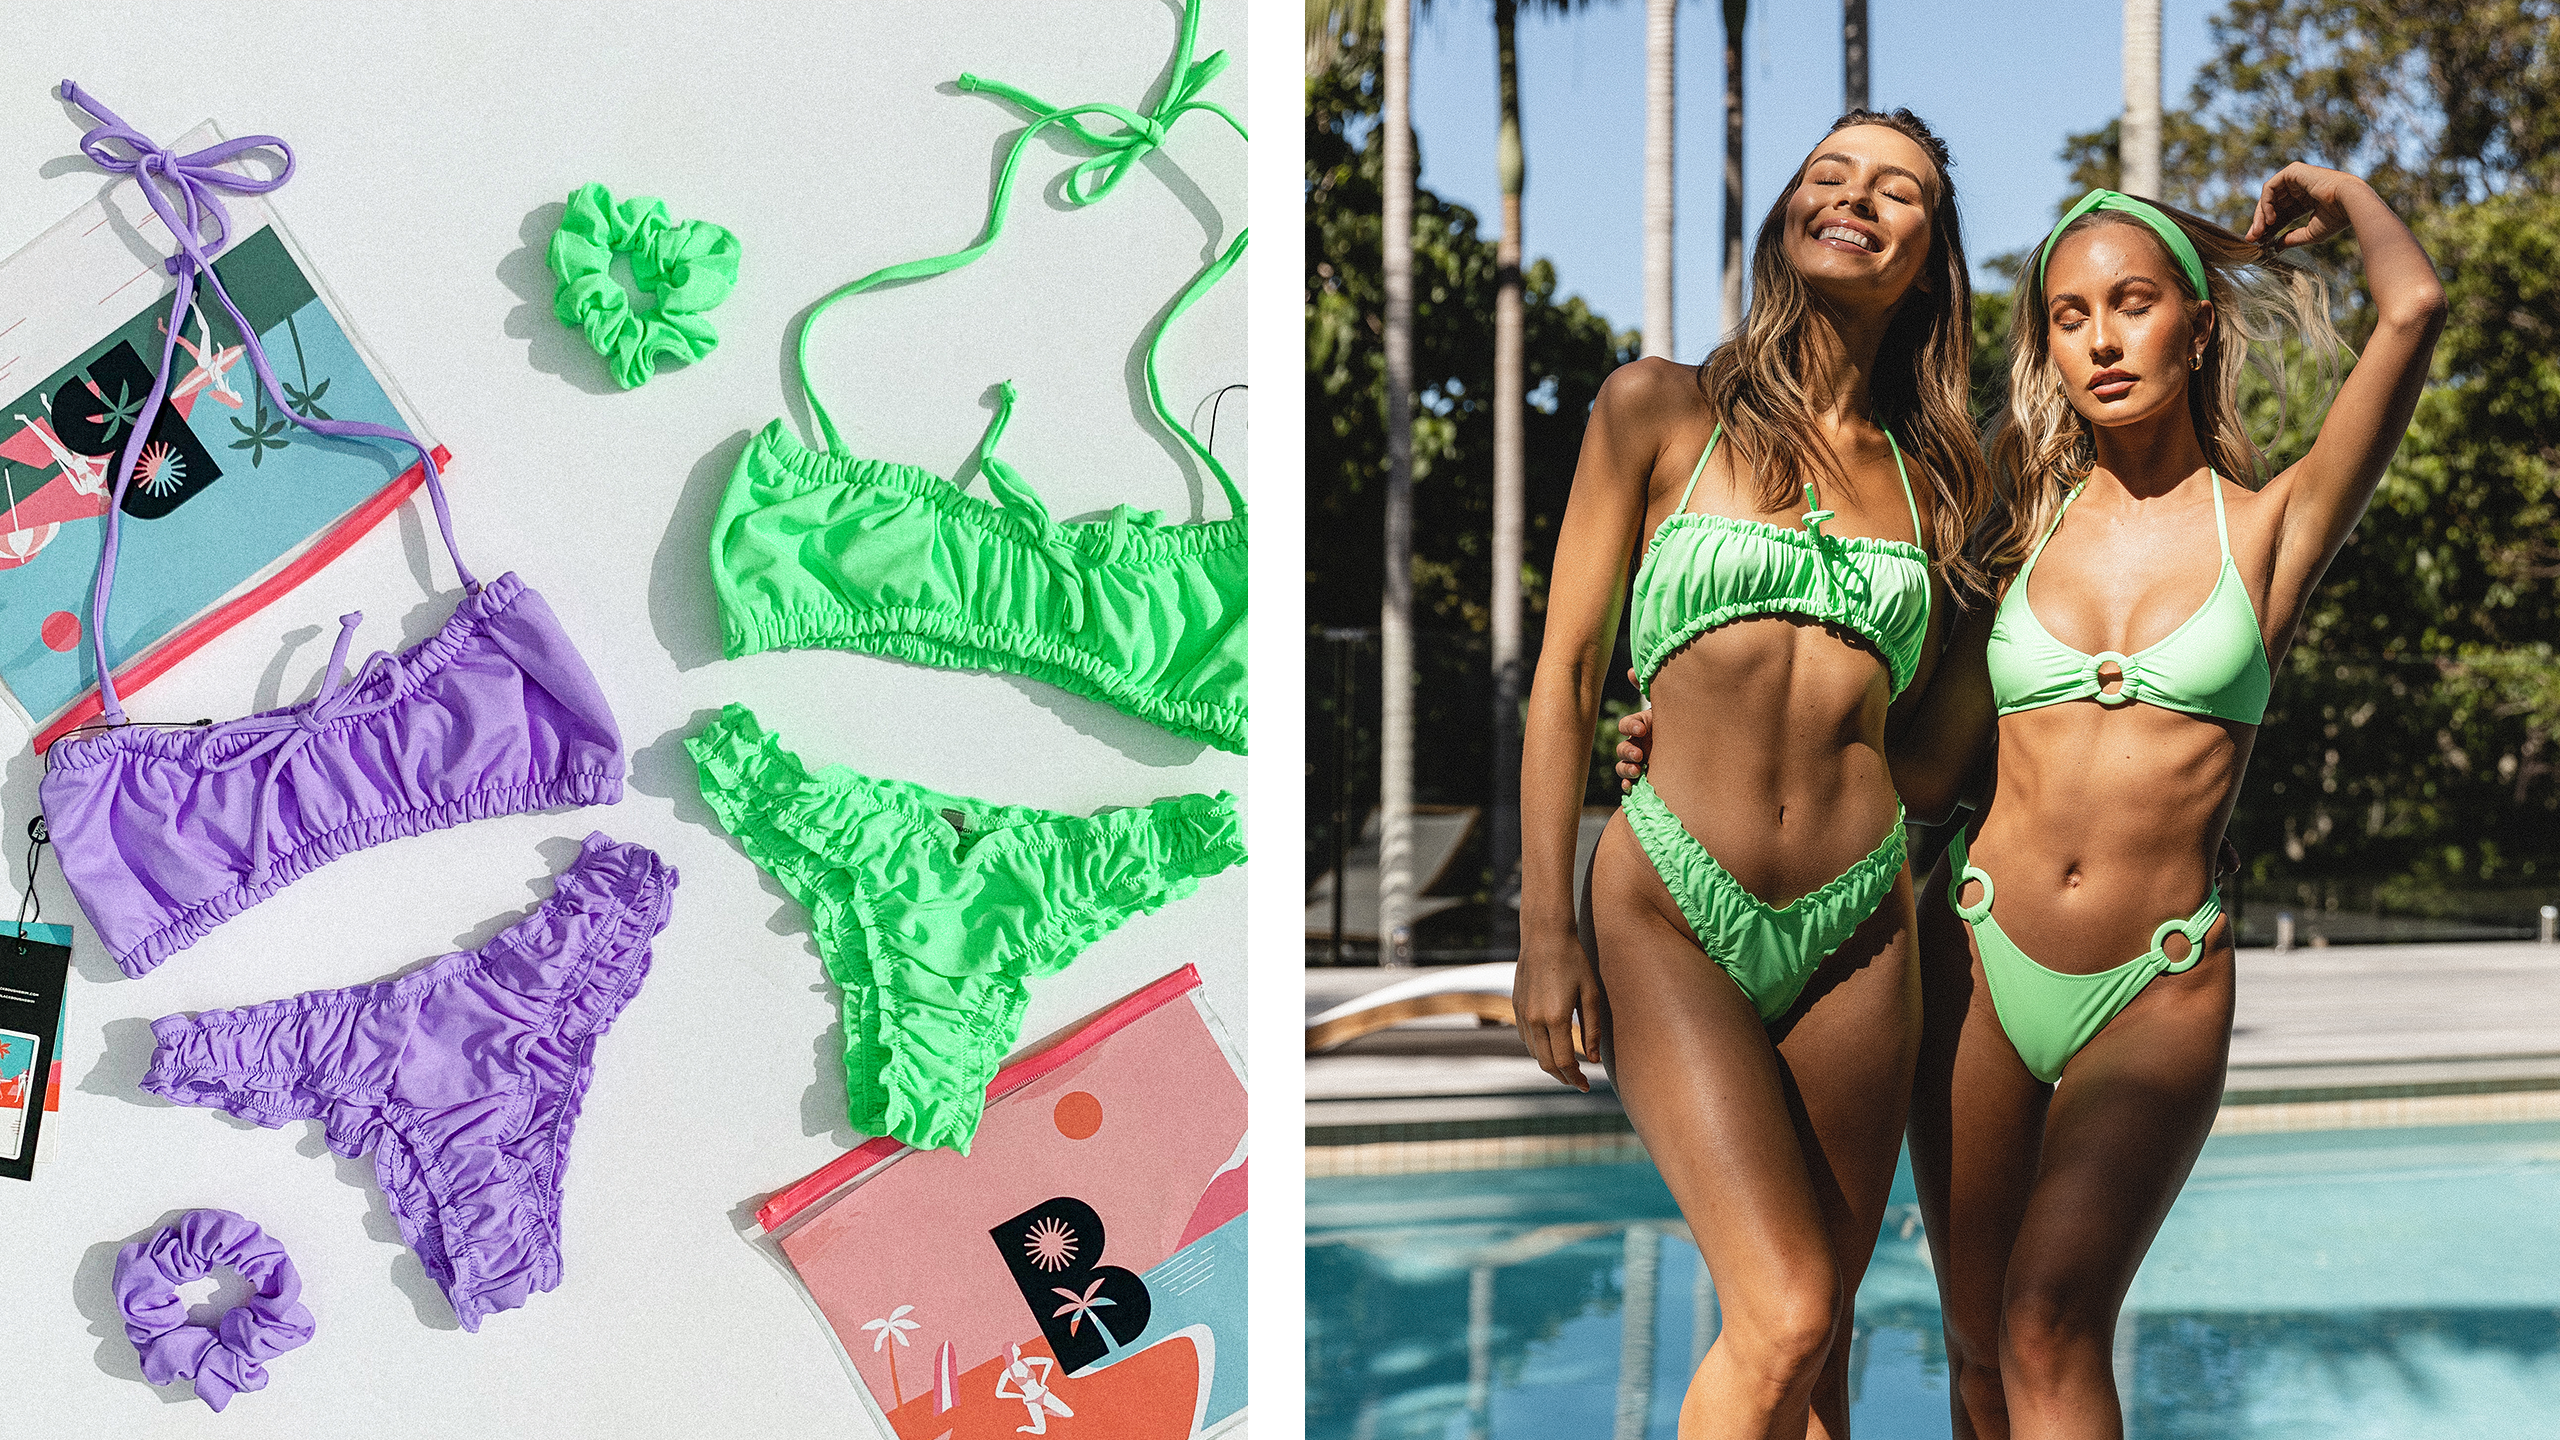 Photos of swimsuits and packaging for swimwear brand Blackbough